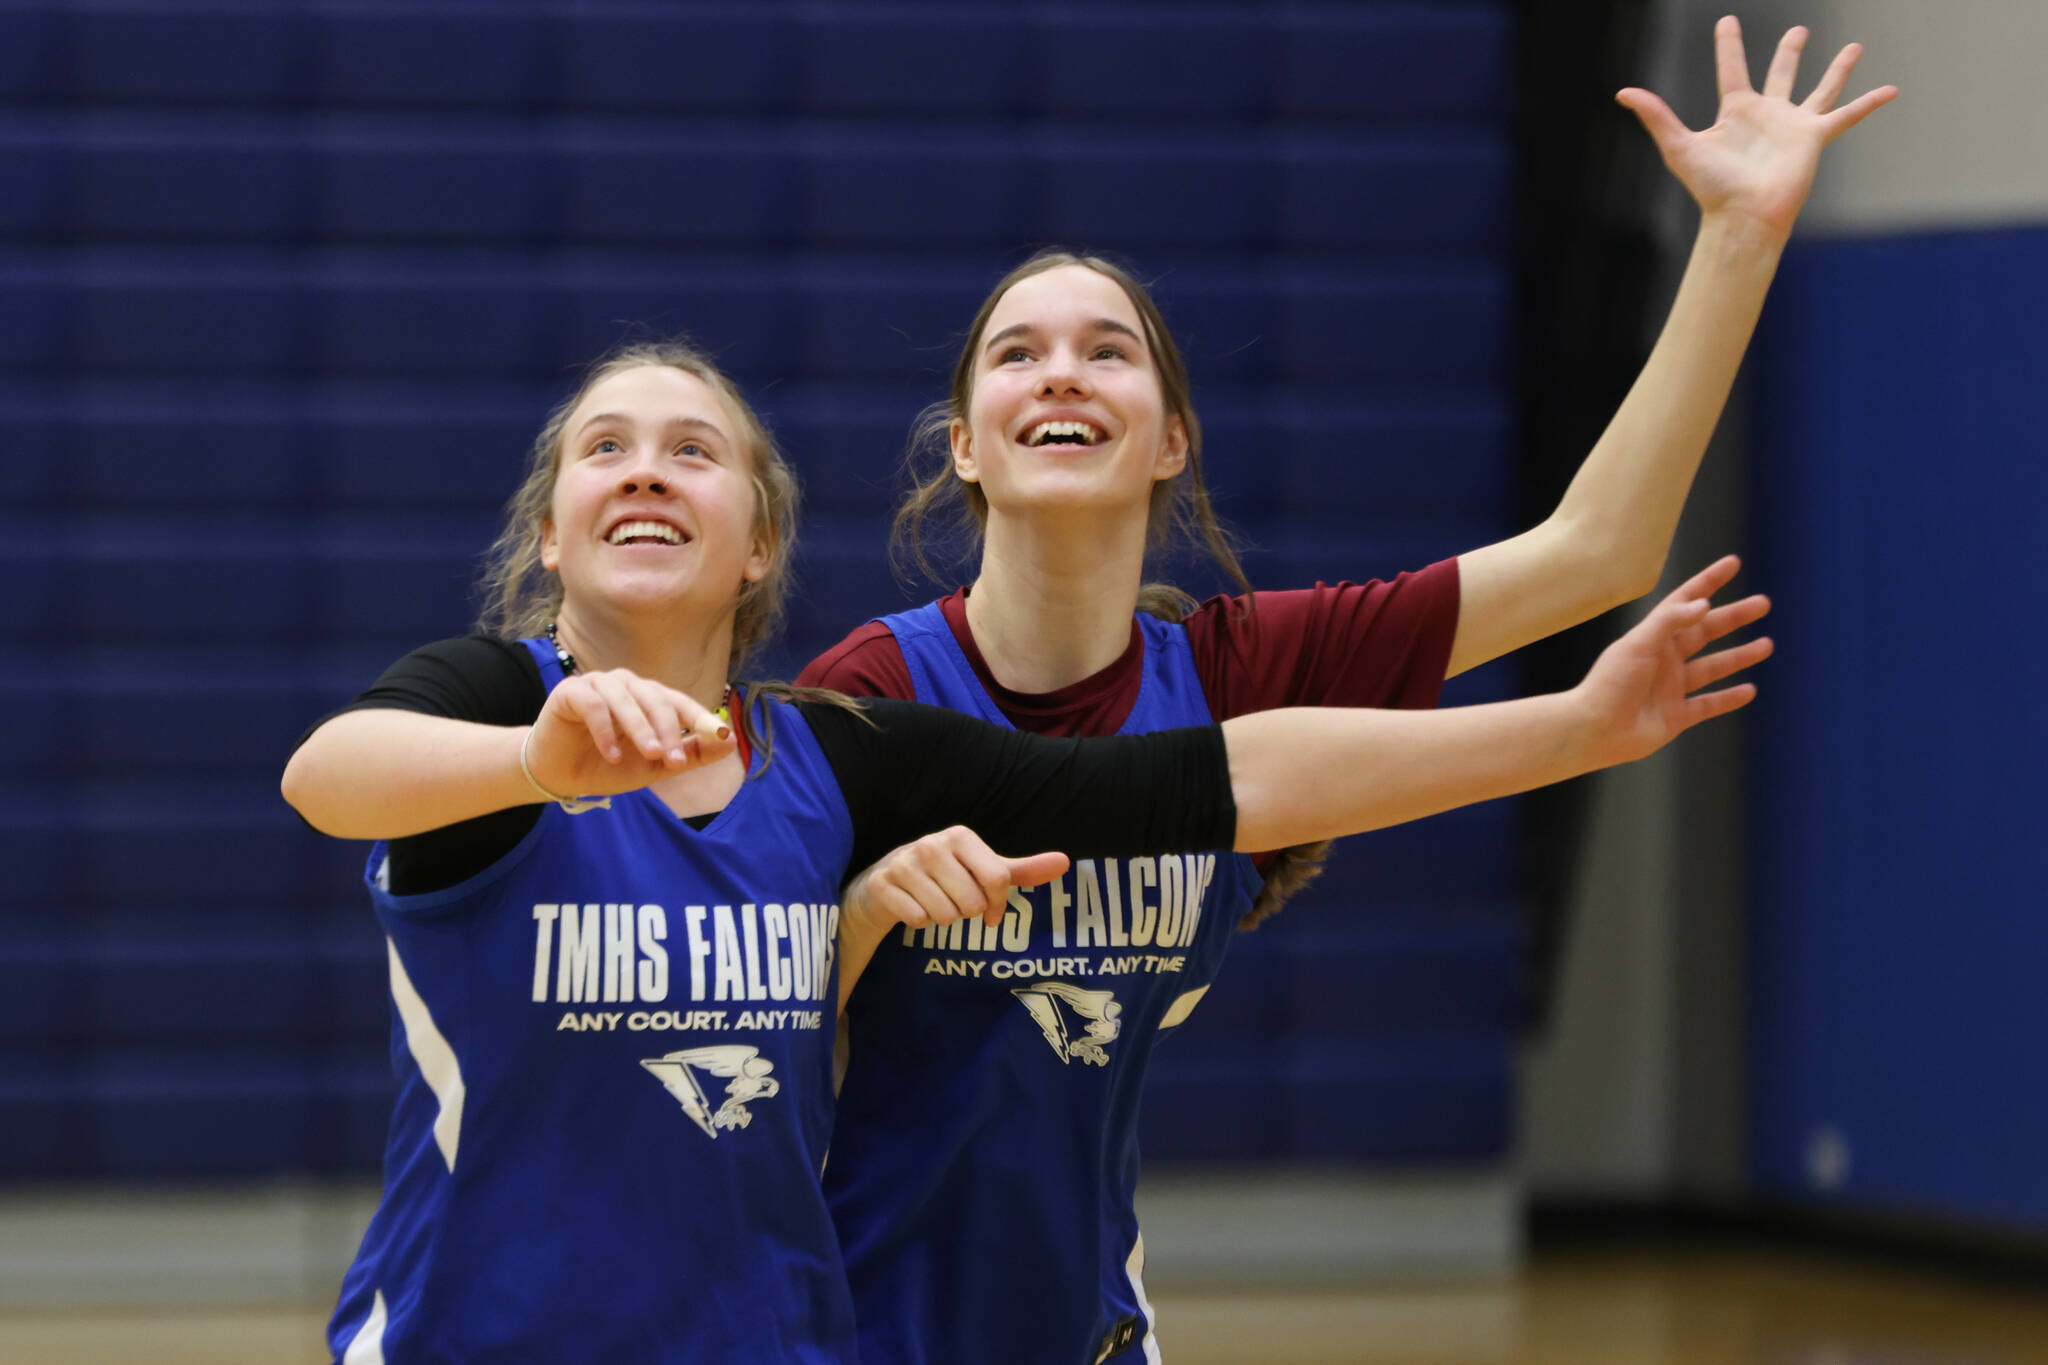 Ben Hohenstatt / Juneau Empire
Ashlyn Gates and Cailynn Baxter practice boxing out during practice at Thunder Mountain High School. Gates and the Baxter twins are among the athletic core that gives coach Andly Lee confidence that TMHS can compete with any team on its schedule.